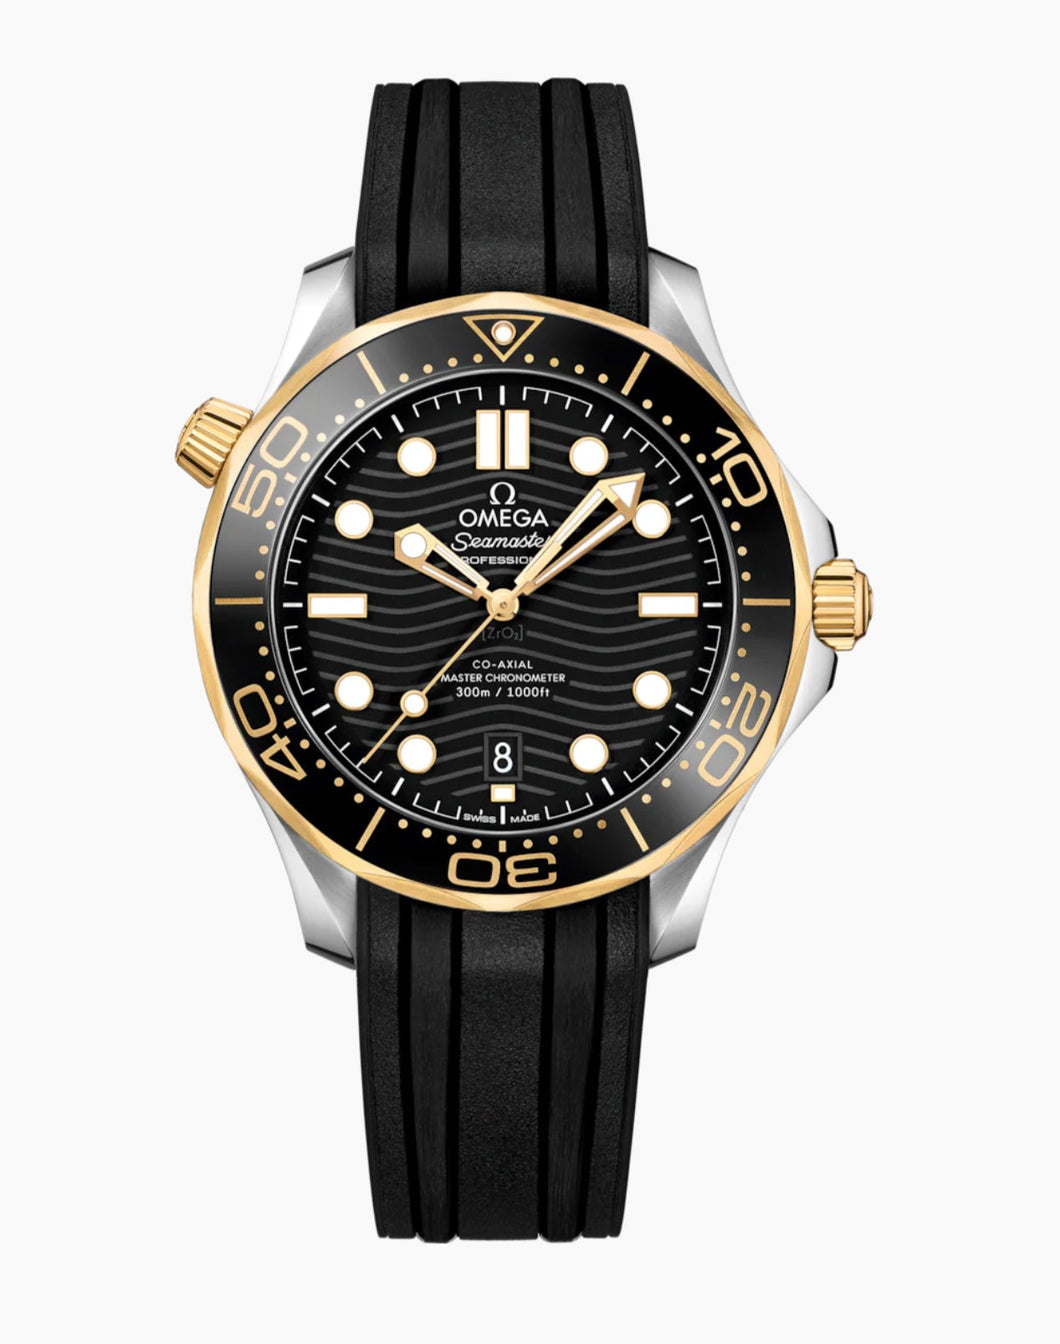 OMEGA-SEAMASTER .DIVER 300M 42 MM, STEEL ‑ YELLOW GOLD ON RUBBER STRAP 210.22.42.20.01.001